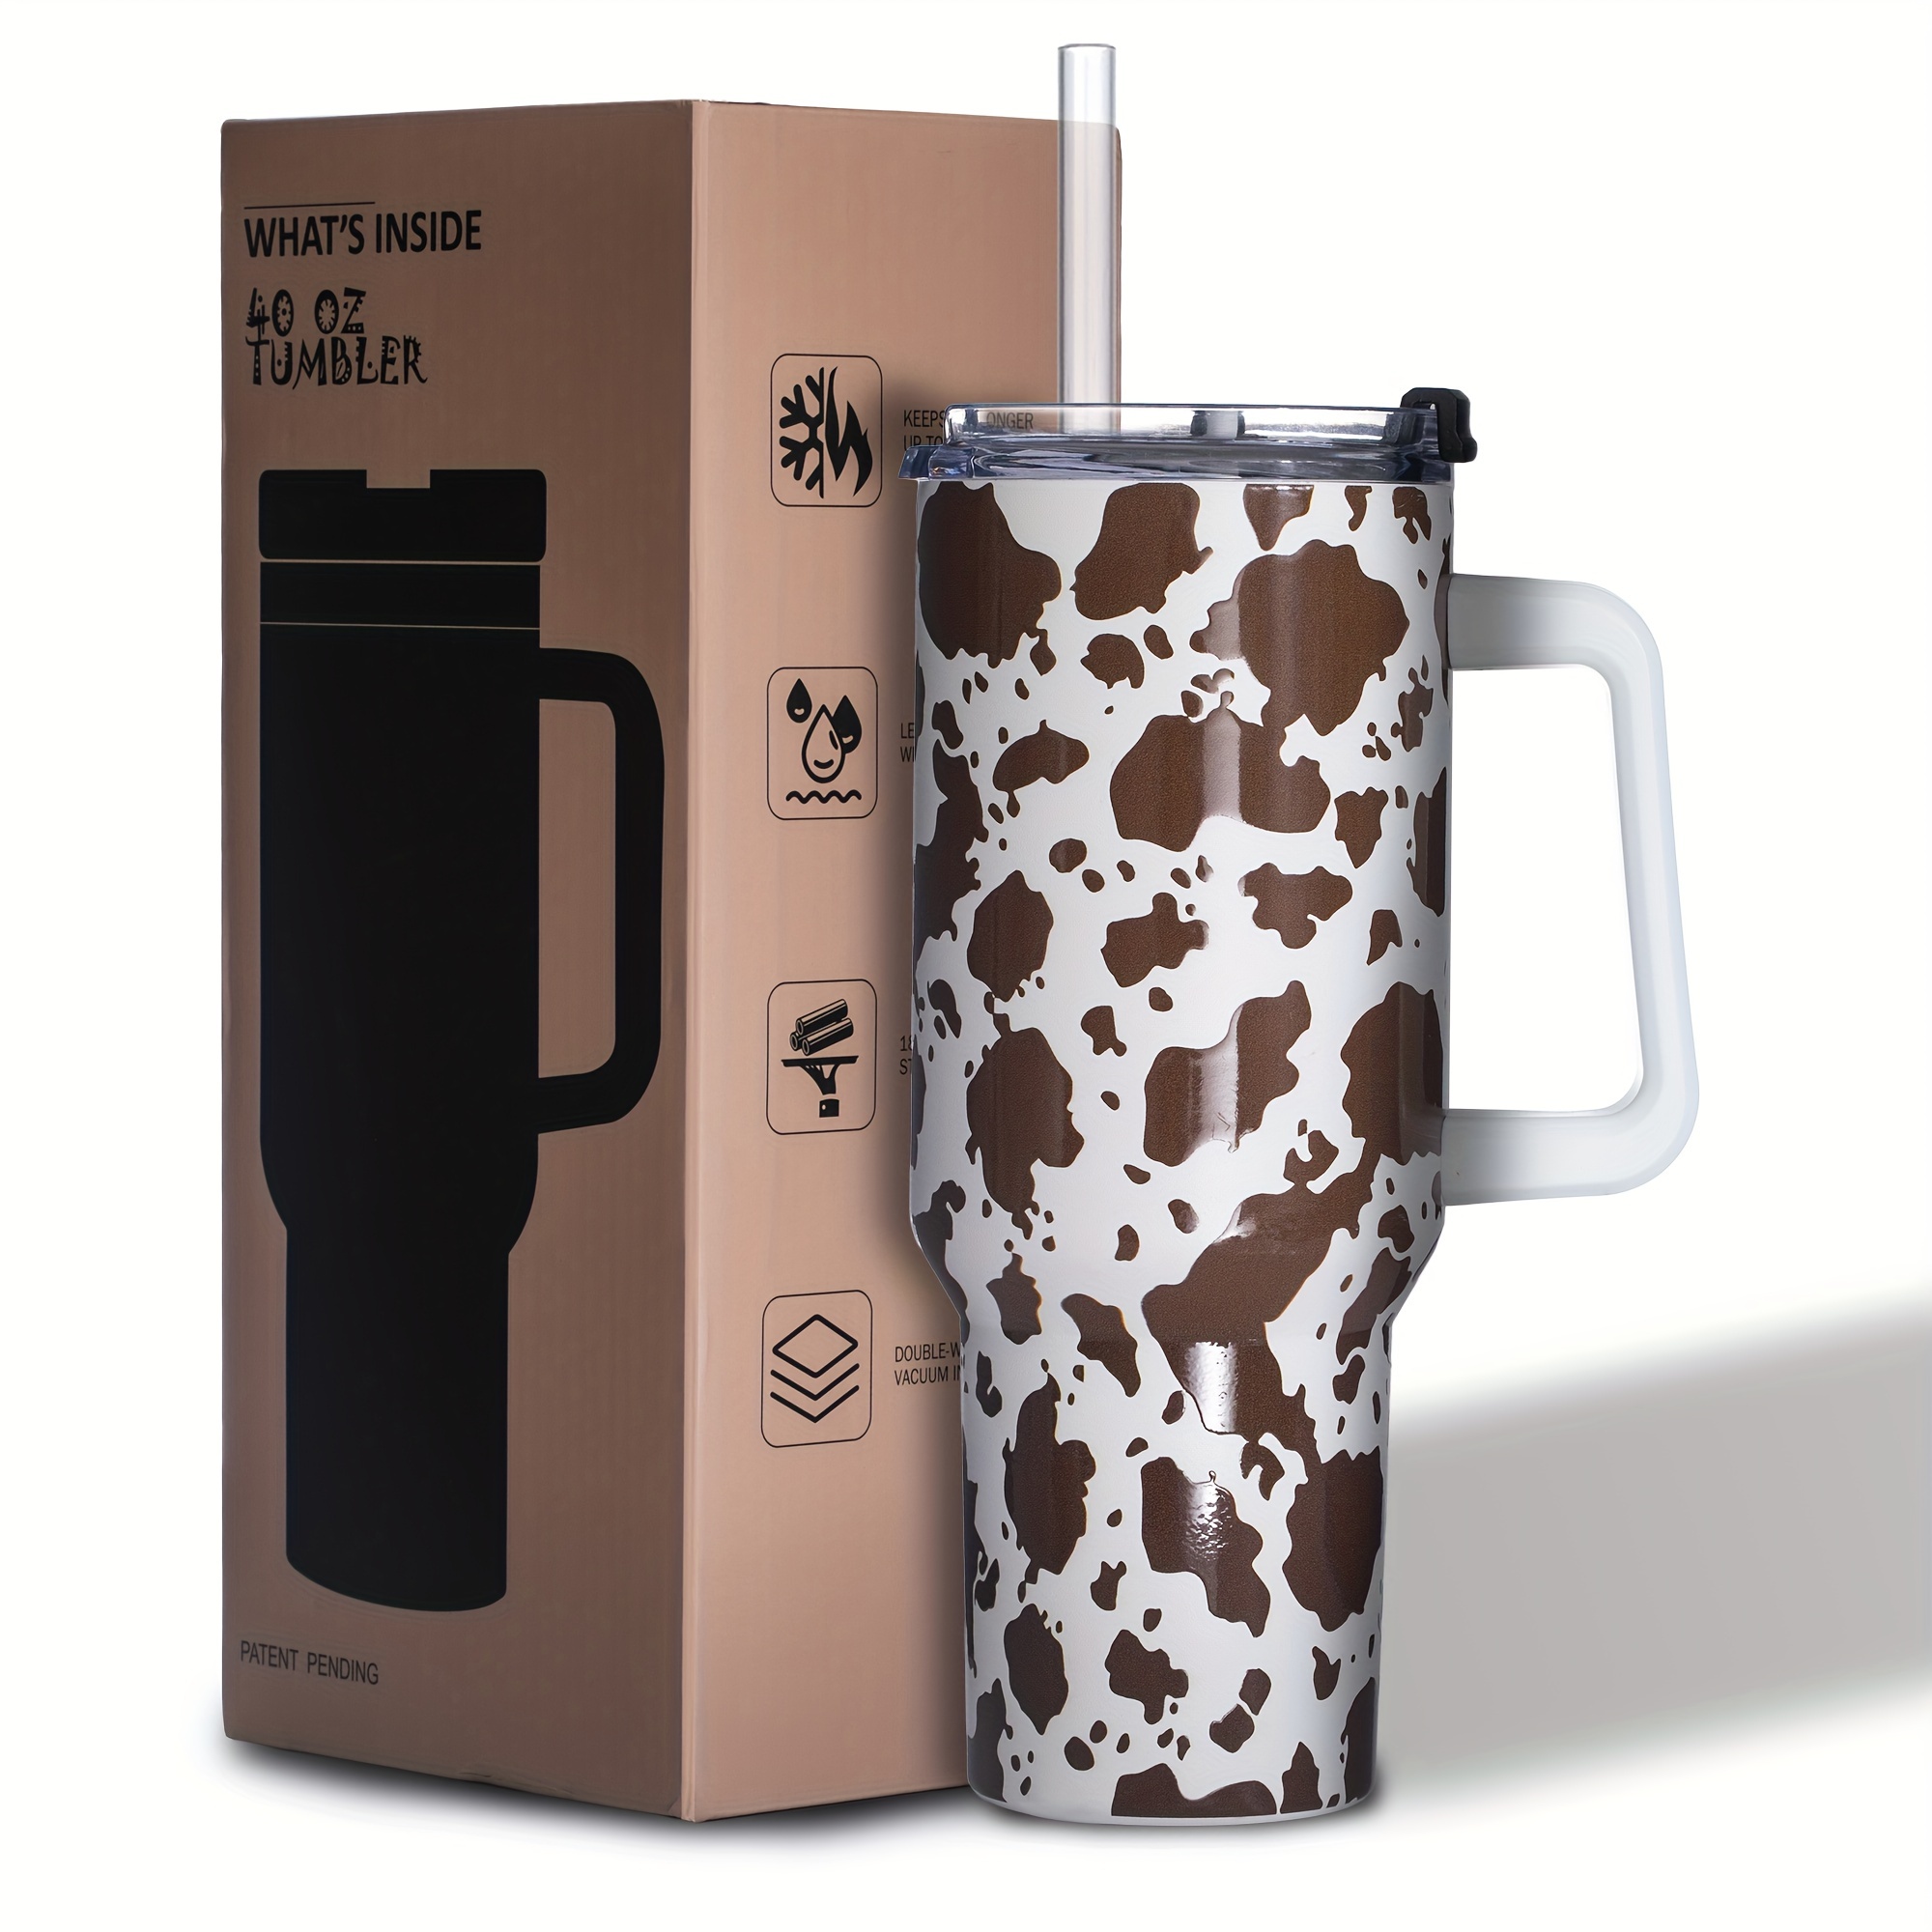 

Brown Cow Print 40 Oz Tumbler With Handle - Stainless Steel Cup With Straw - Insulated Coffee Mug With Lid - Brown Cow Print Birthday Gifts For Women - Hand Wash Only